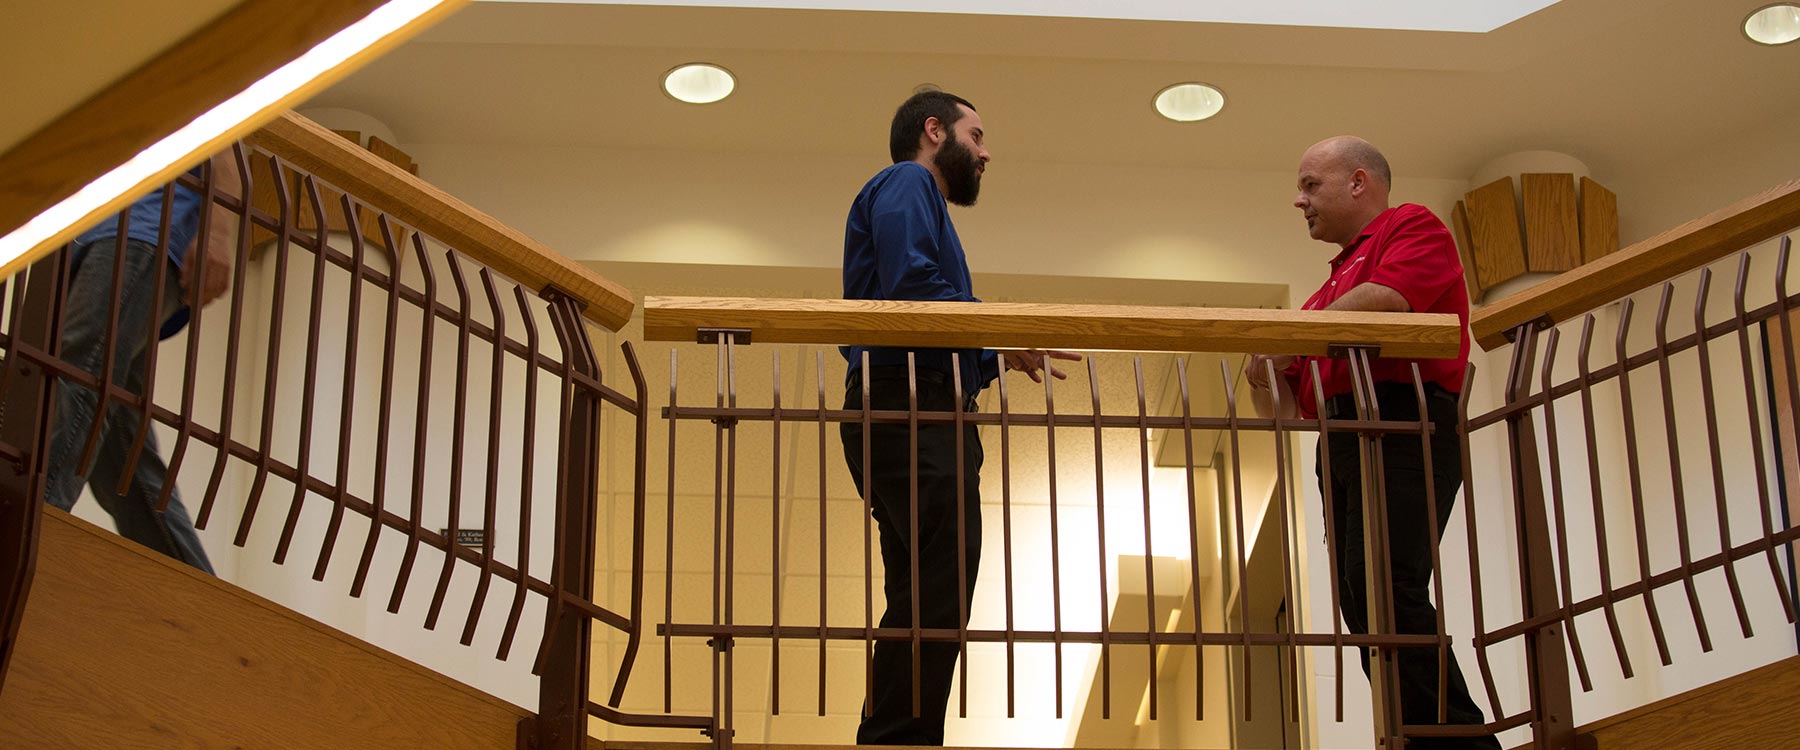 A student stands talking with a professor near a balcony railing in a warmly lit academic building.